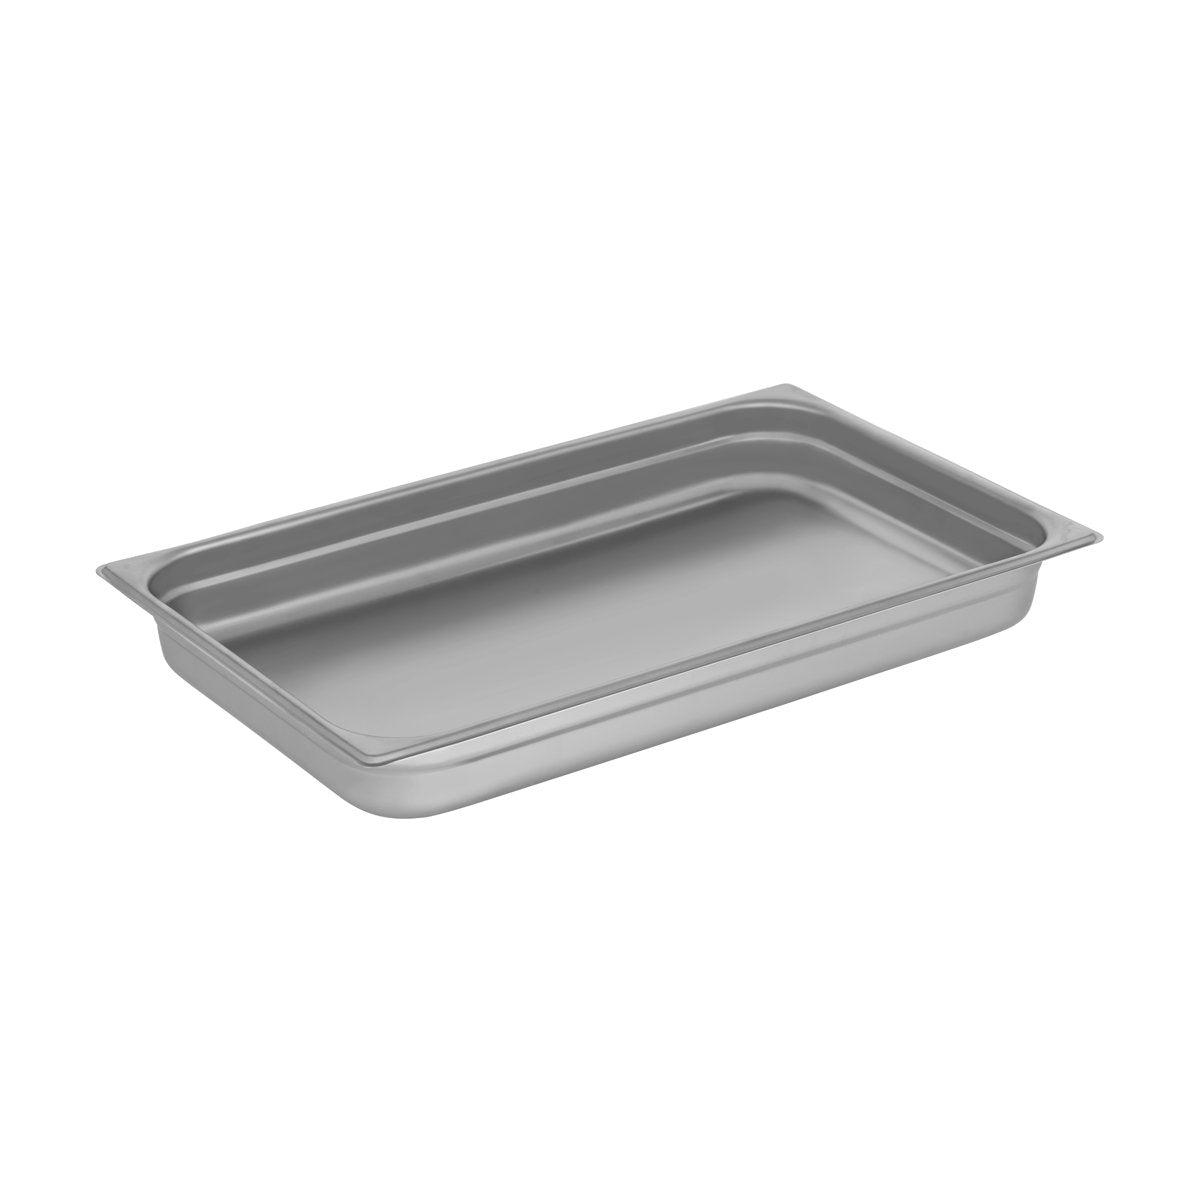 GN-11065 Chef Inox Gastronorm Pan 1/1 Size 65mm Tomkin Australia Hospitality Supplies